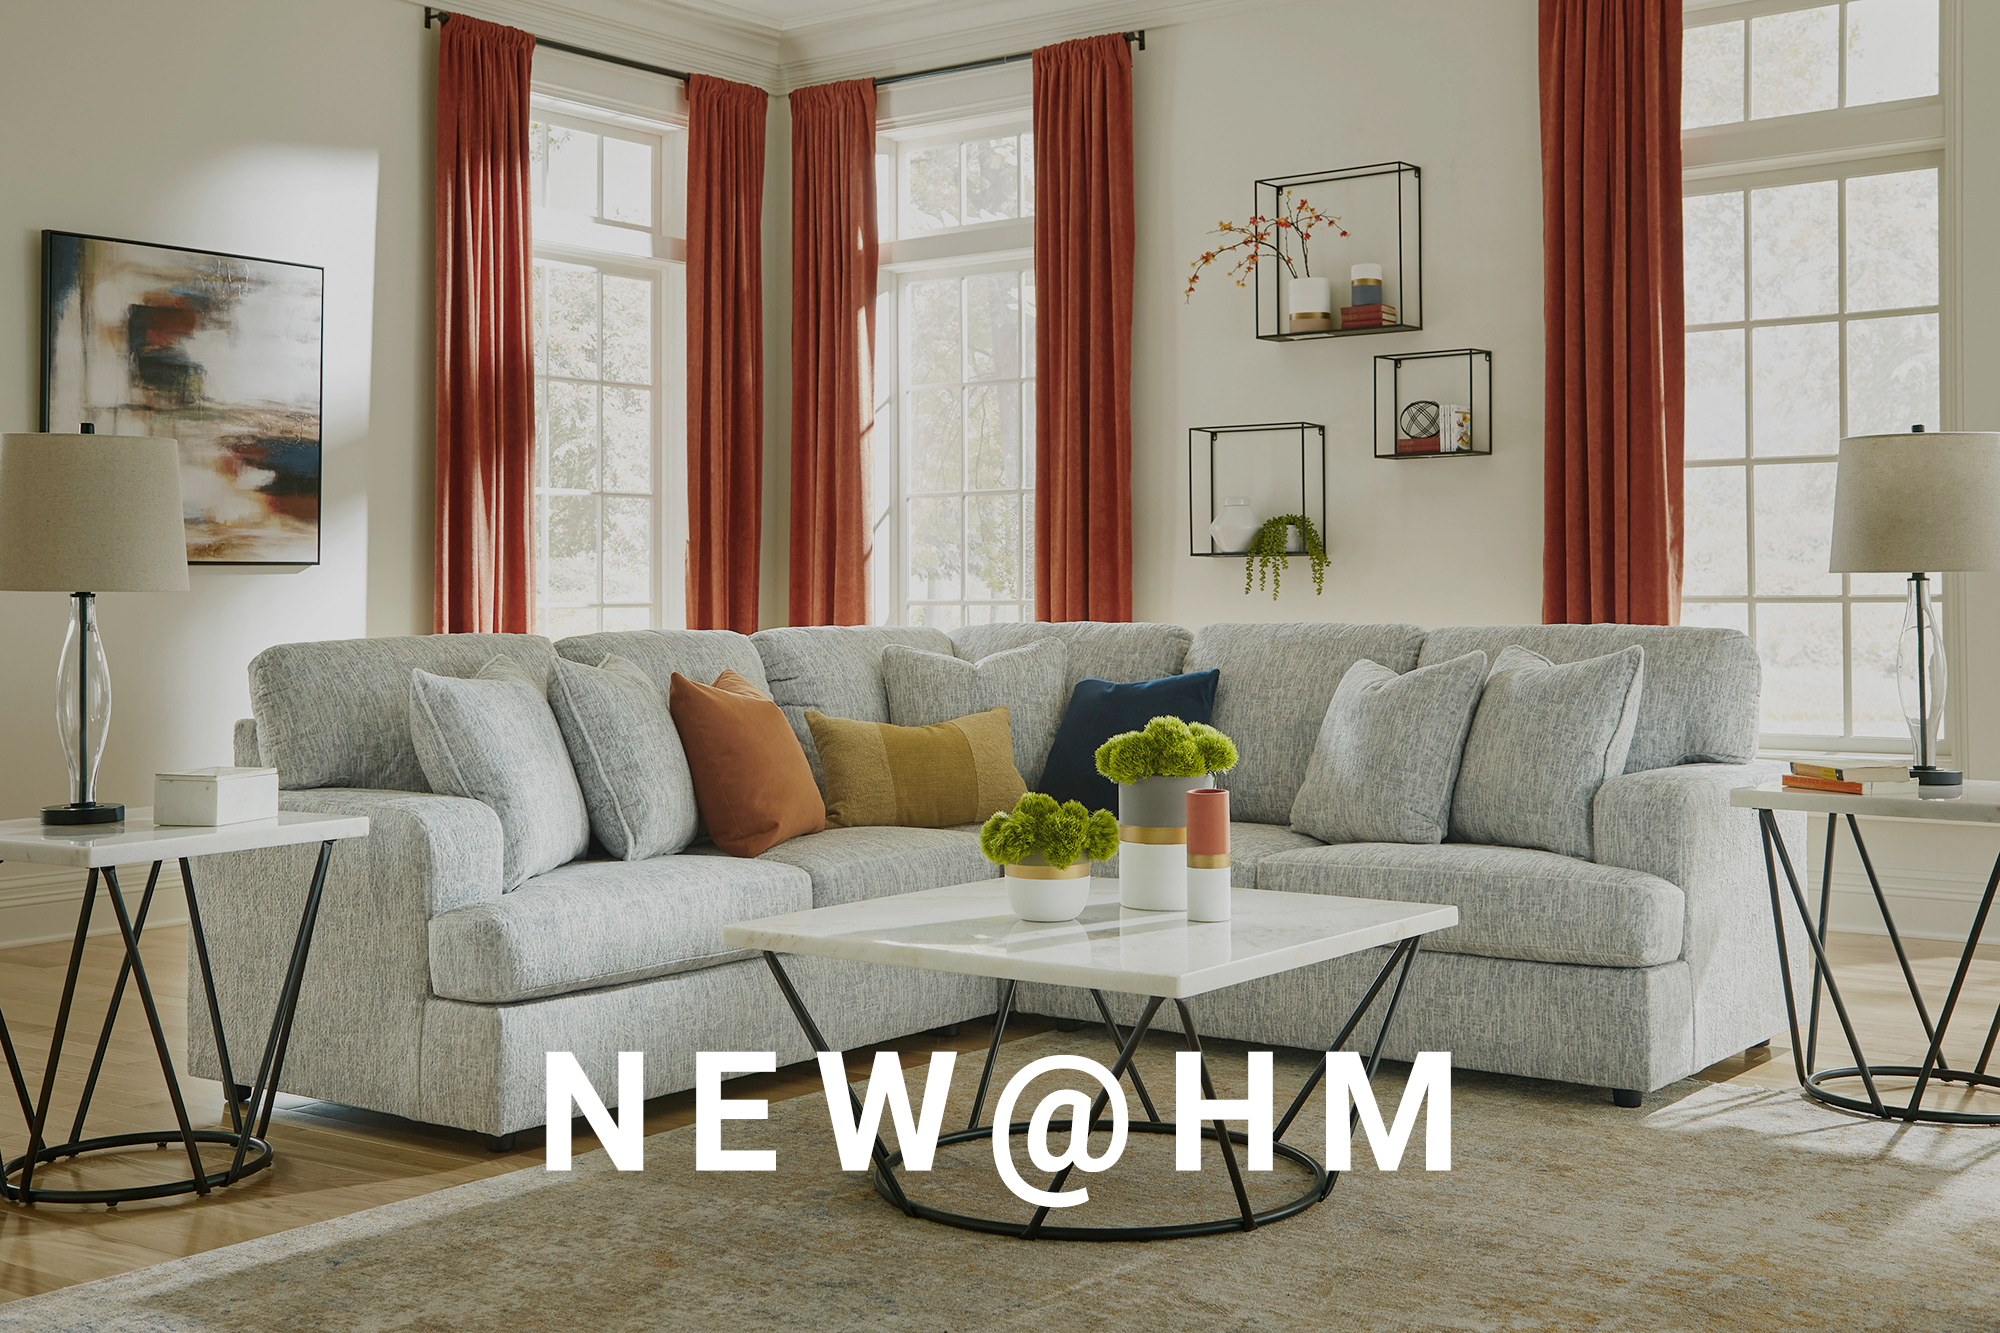 Find What's New at Hm